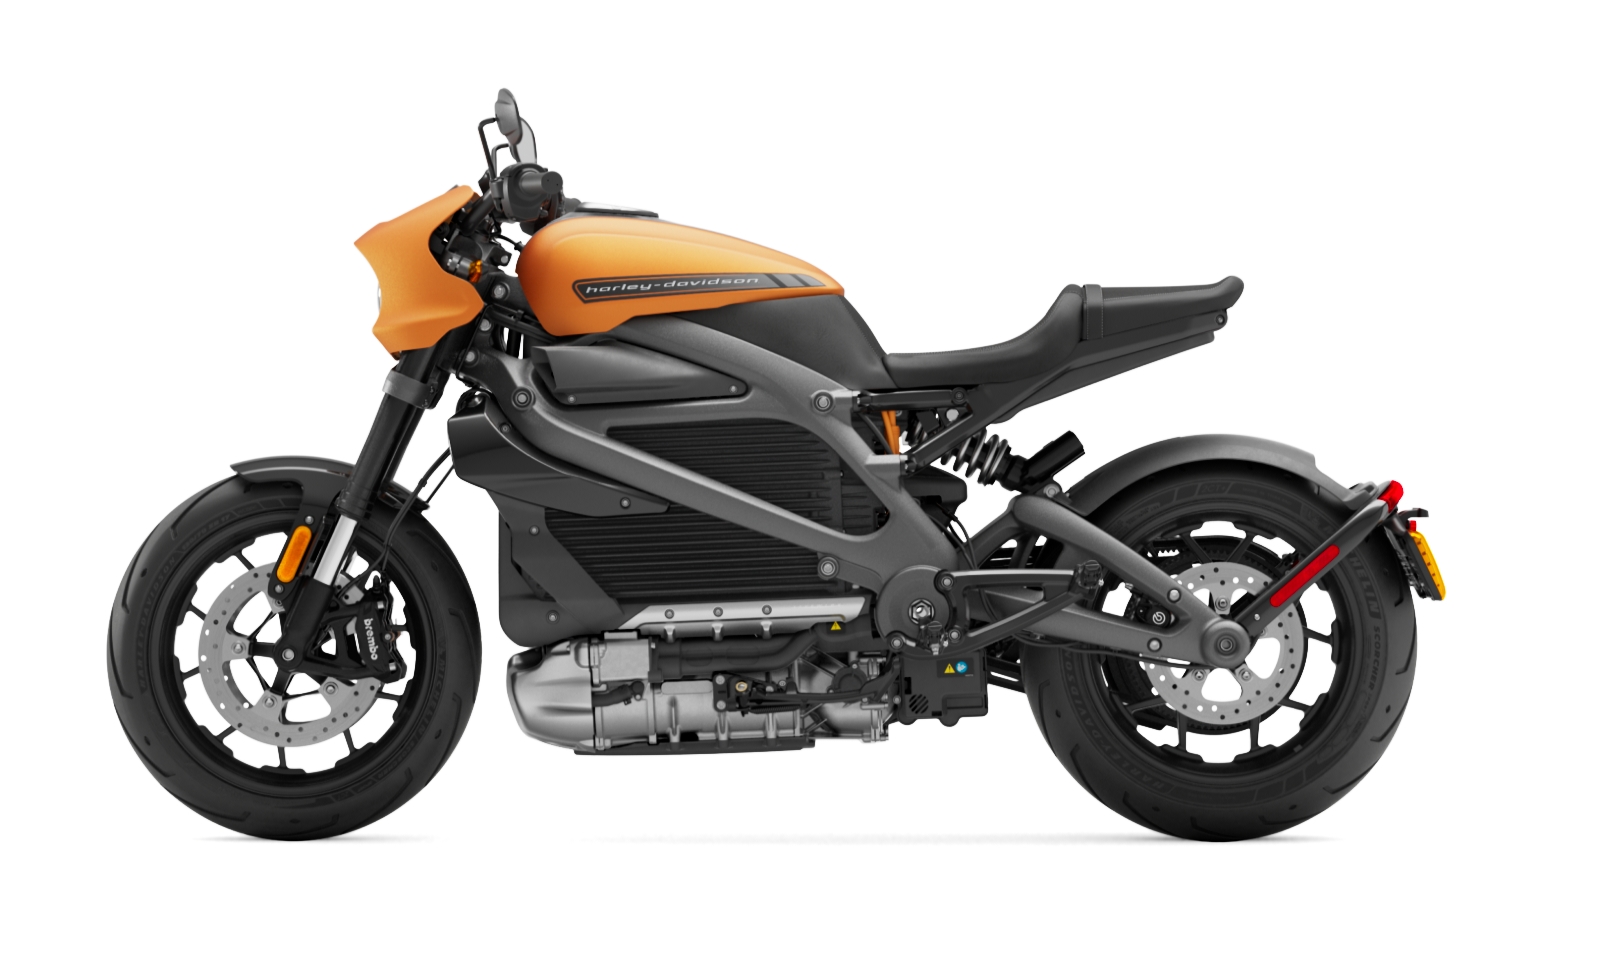 Harley Davidson Unveils Livewire Electric Motorcycle Price 2 New Evs